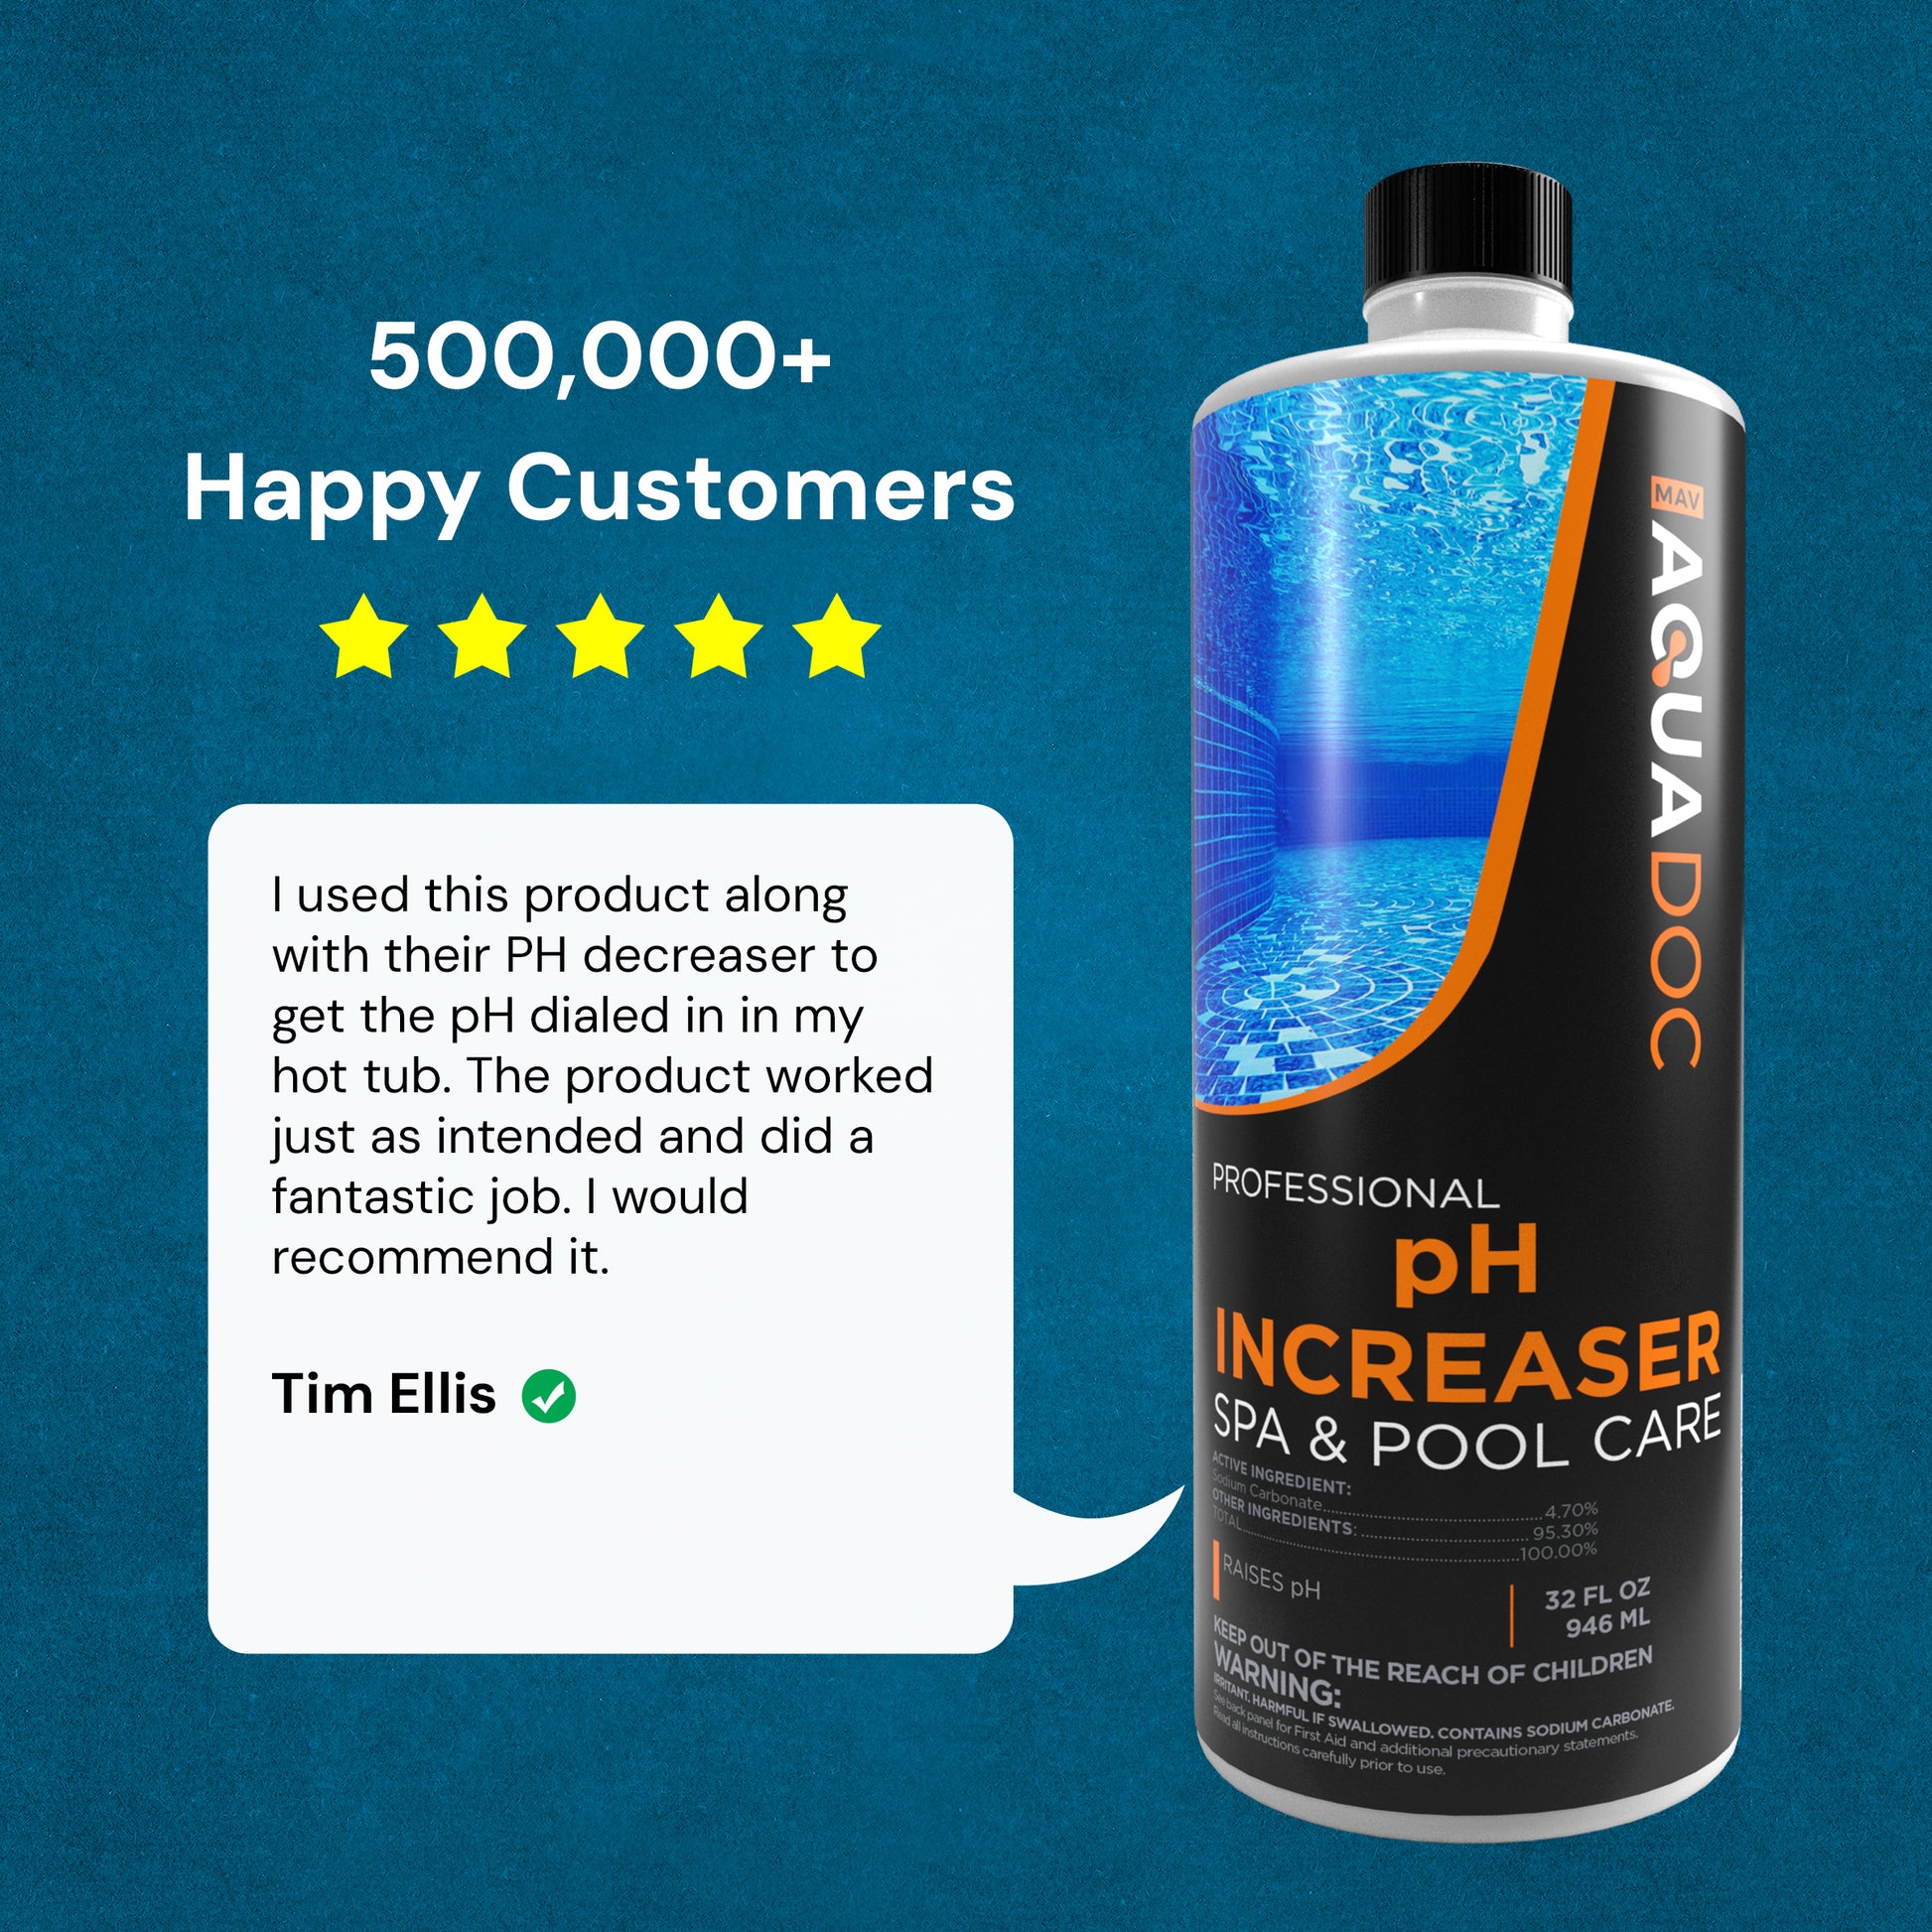 Quickly adjust spa water pH with pH Increaser